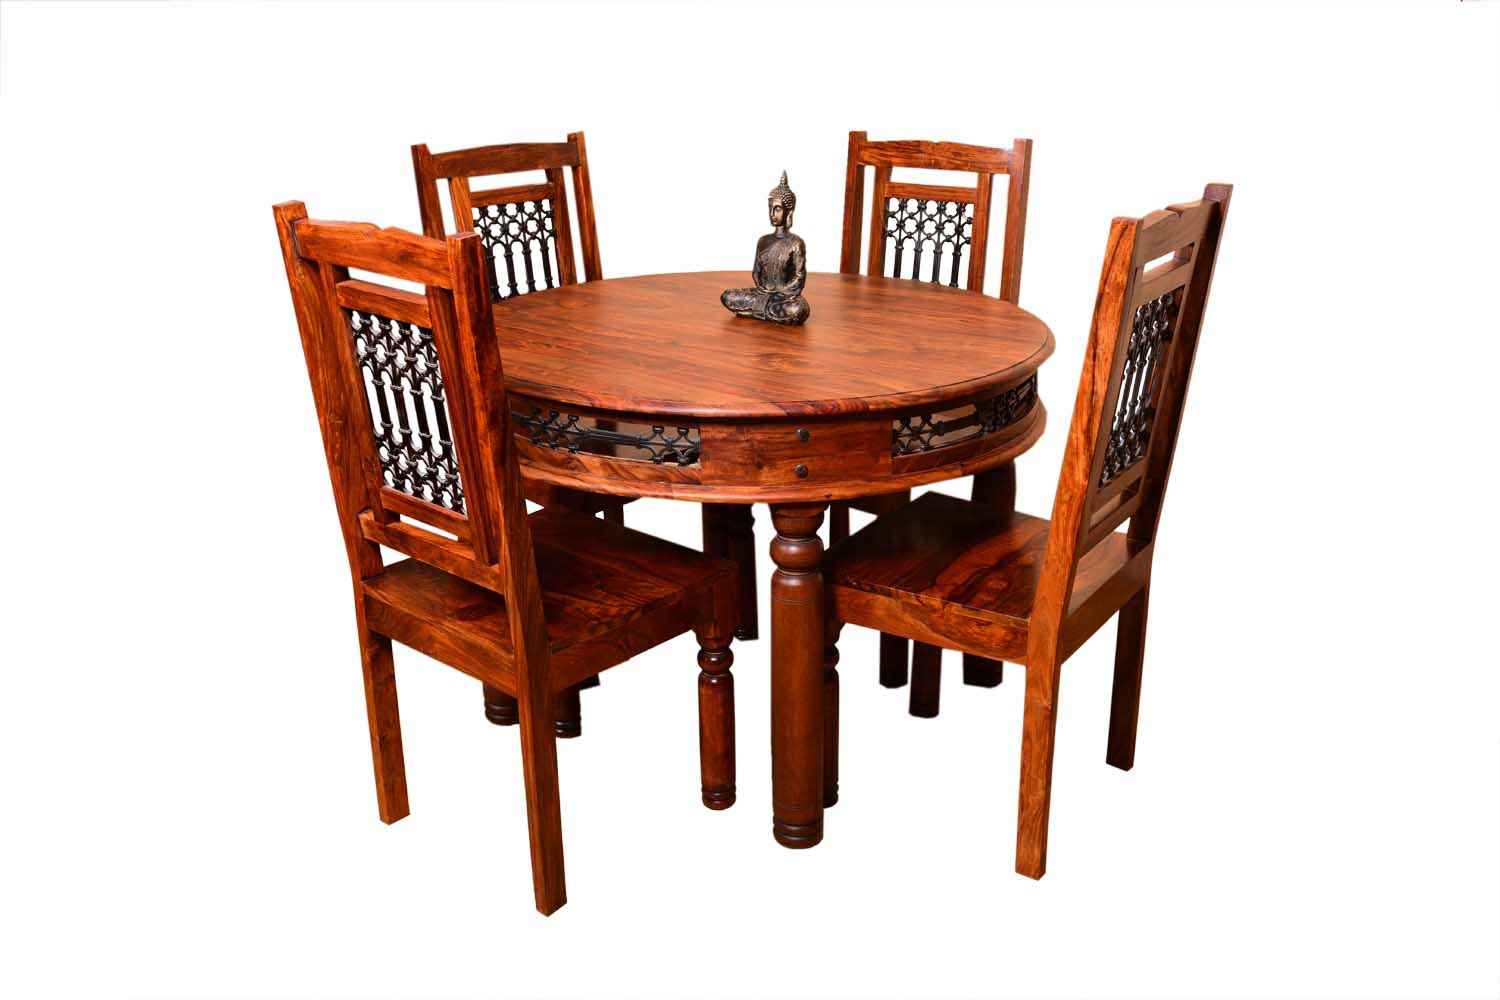 4 Seater Vintage Round Dining Table Set, 4 Seater Dining Table And Chairs Round